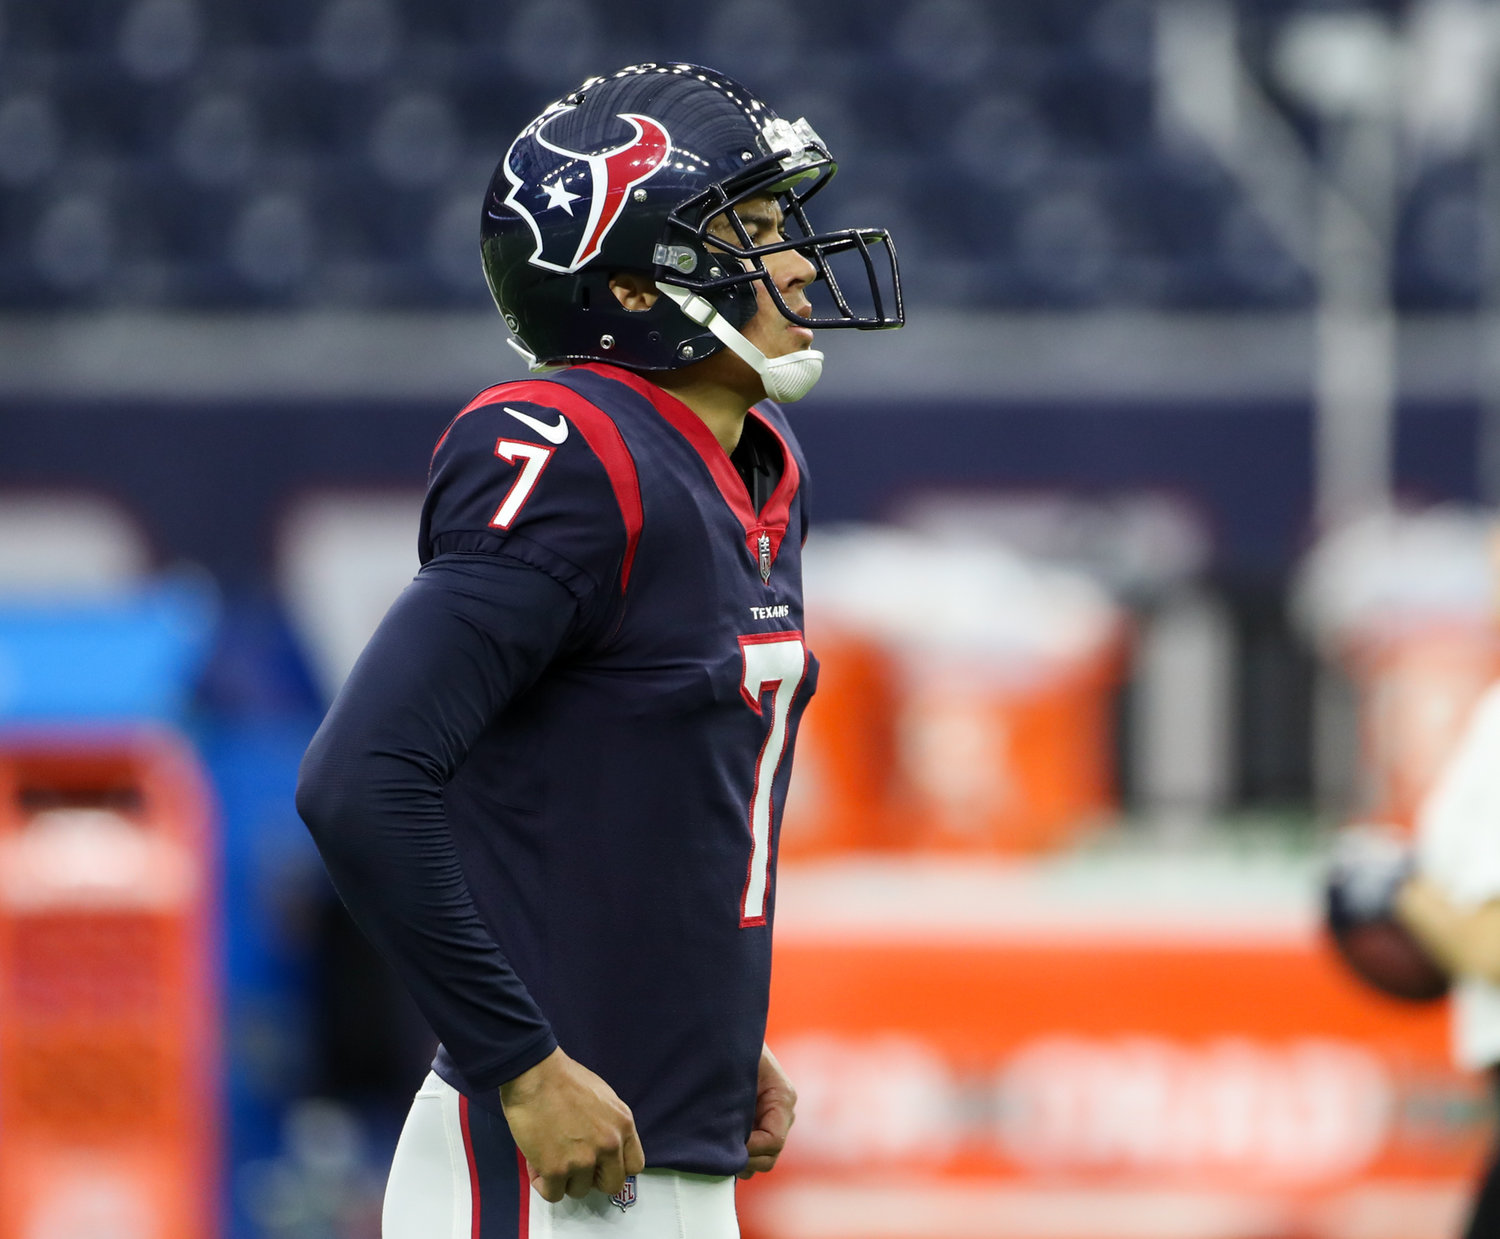 Houston Texans place kicker Ka'imi Fairbairn (7) before the start of an NFL game between the Houston Texans and the New York Jets on November 28, 2021 in Houston, Texas.